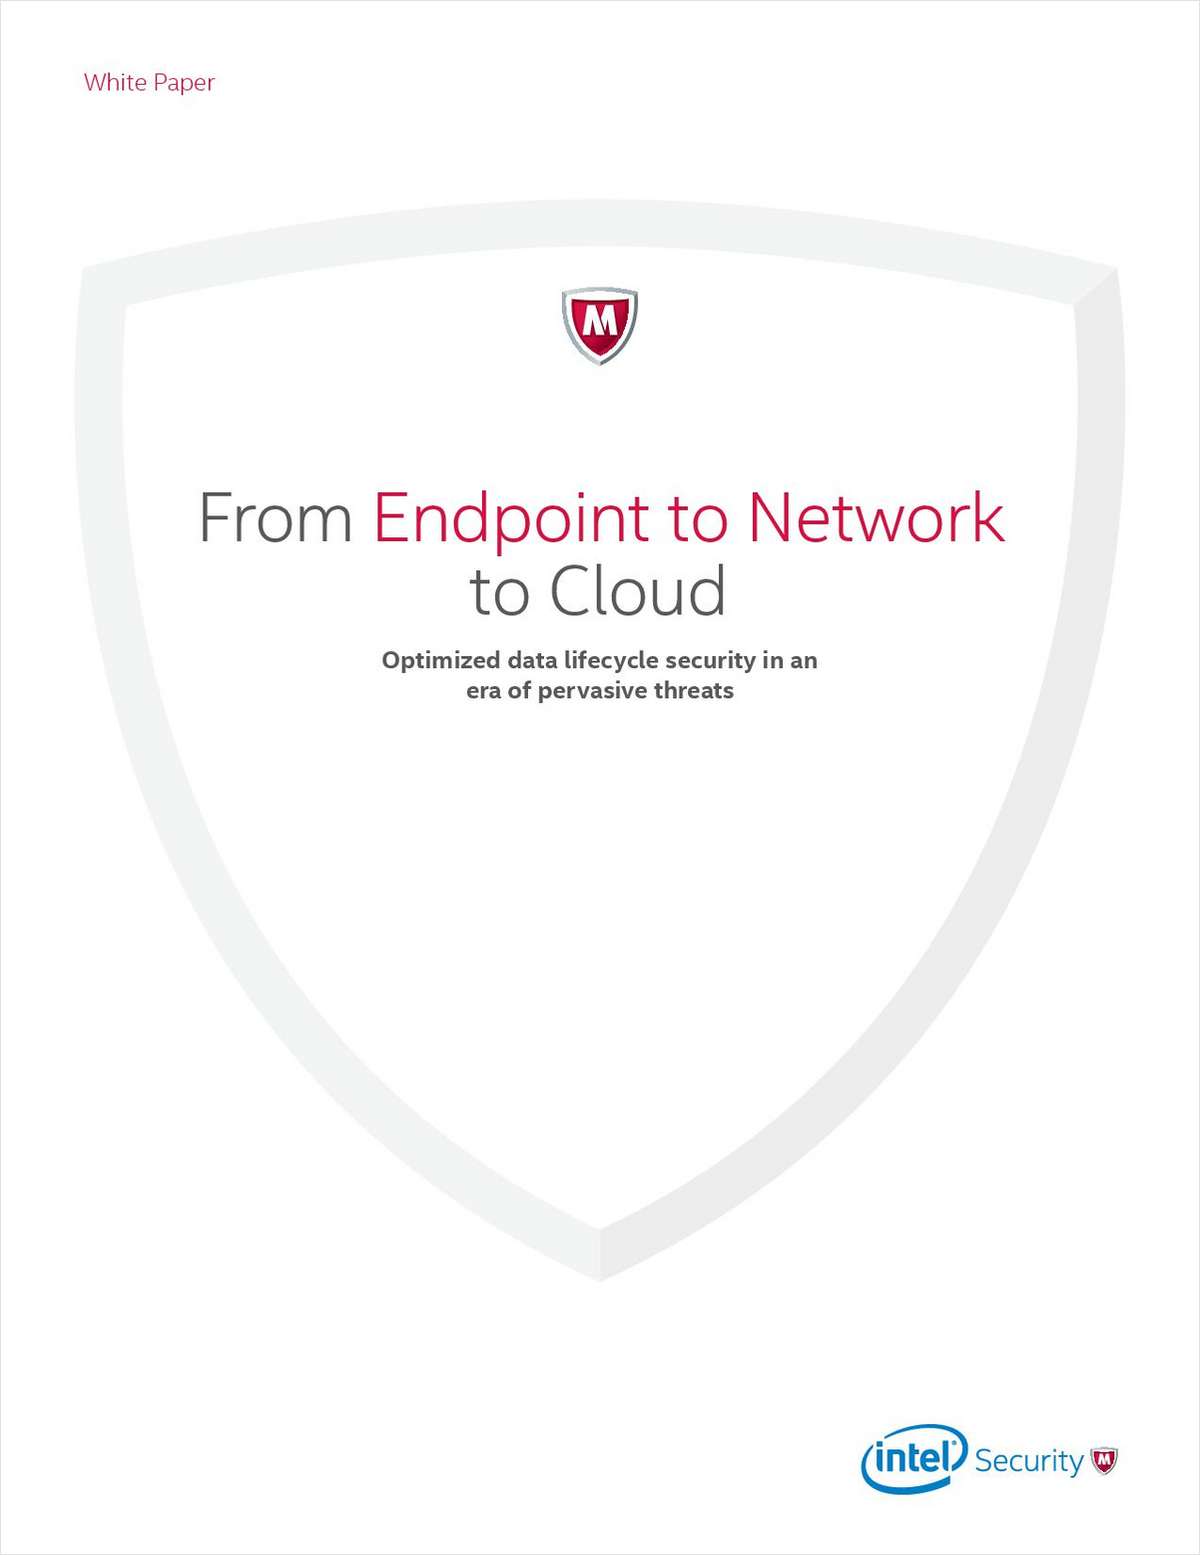 From Endpoint to Network to Cloud: Optimized Data Lifecycle Security in an Era of Pervasive Threats